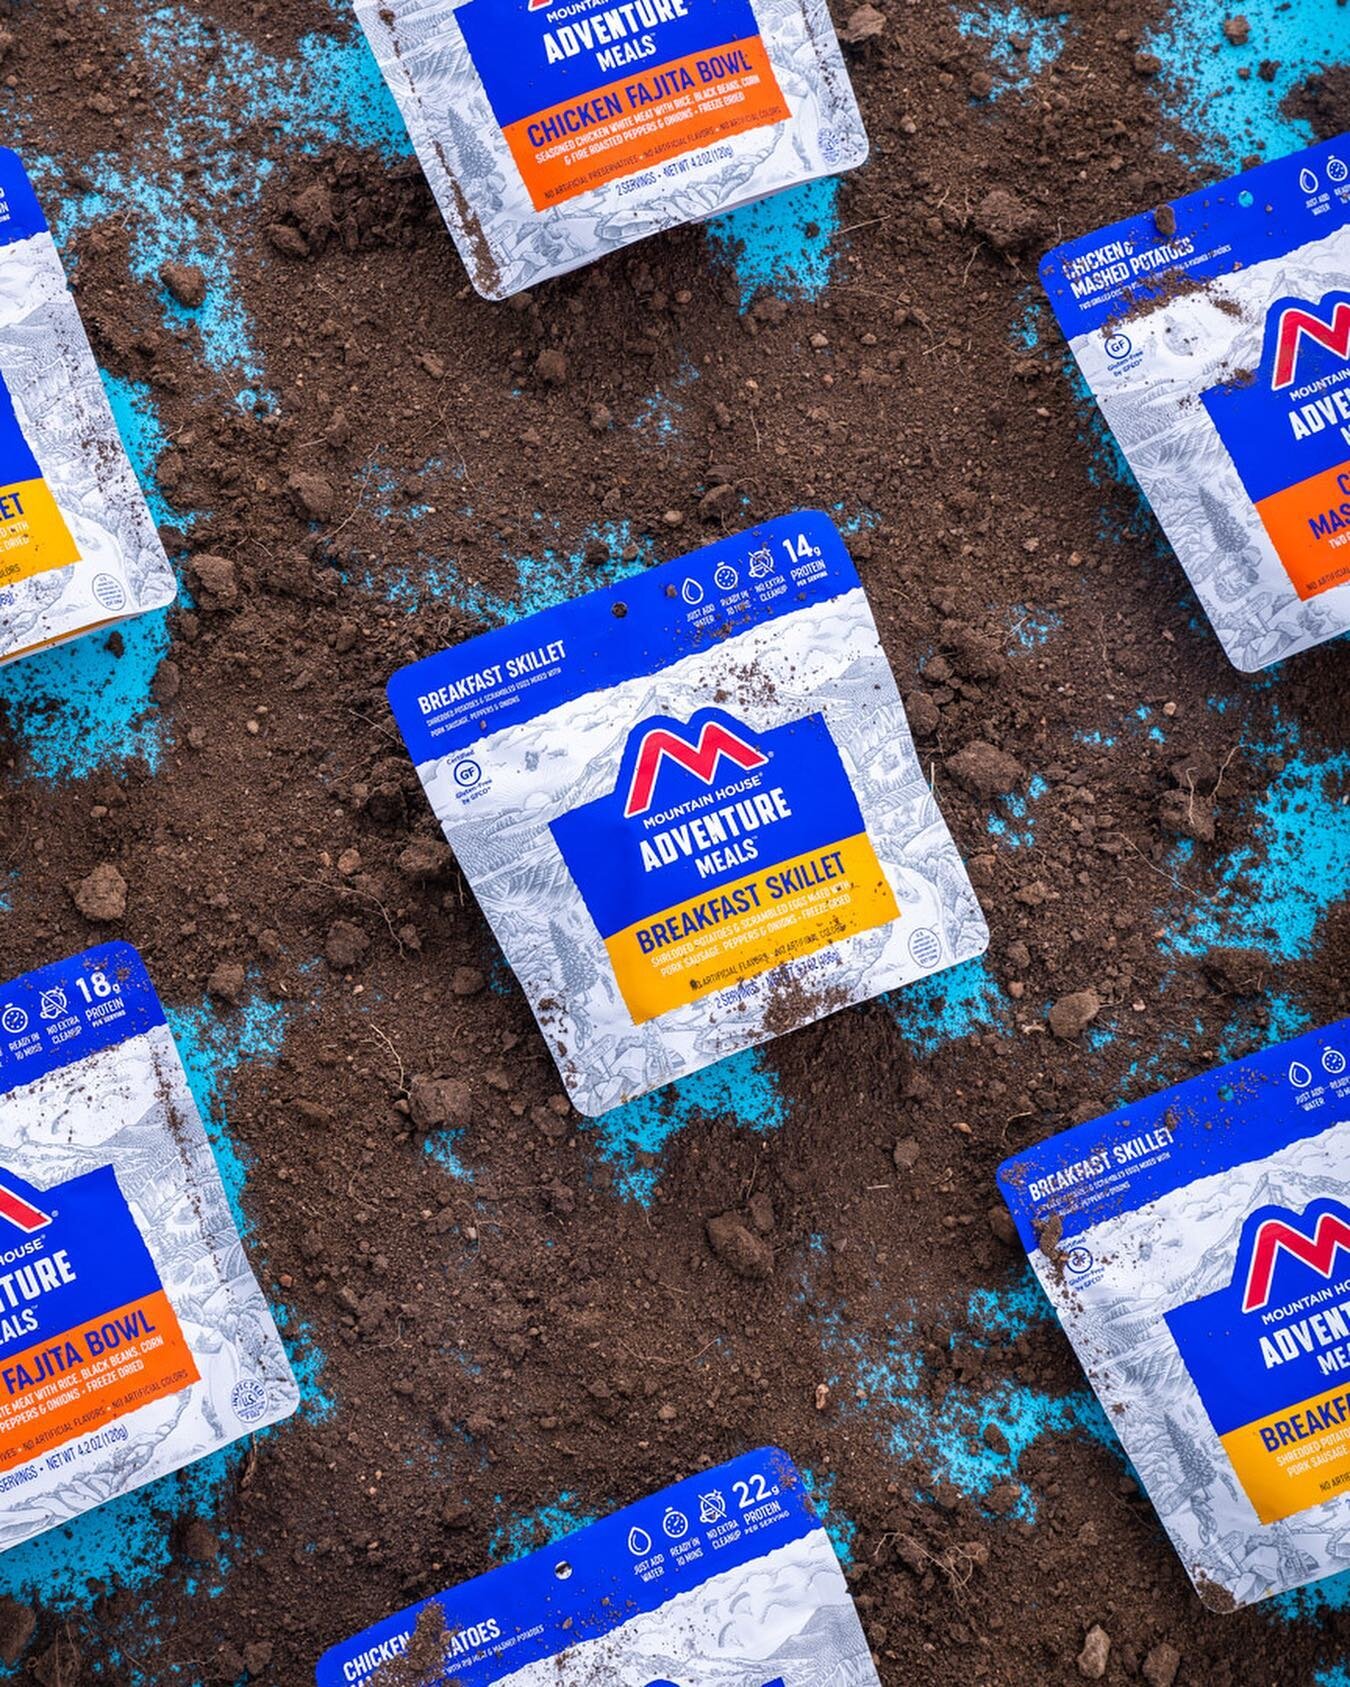 After I get that perfectly crisp and clean shot I always like to play around with props - in this case, some good old dirt from the ground! Swipe for the clean version. Which do you like best?

#mre #coloradocamping #neverstopexploring @mtnhouse #get